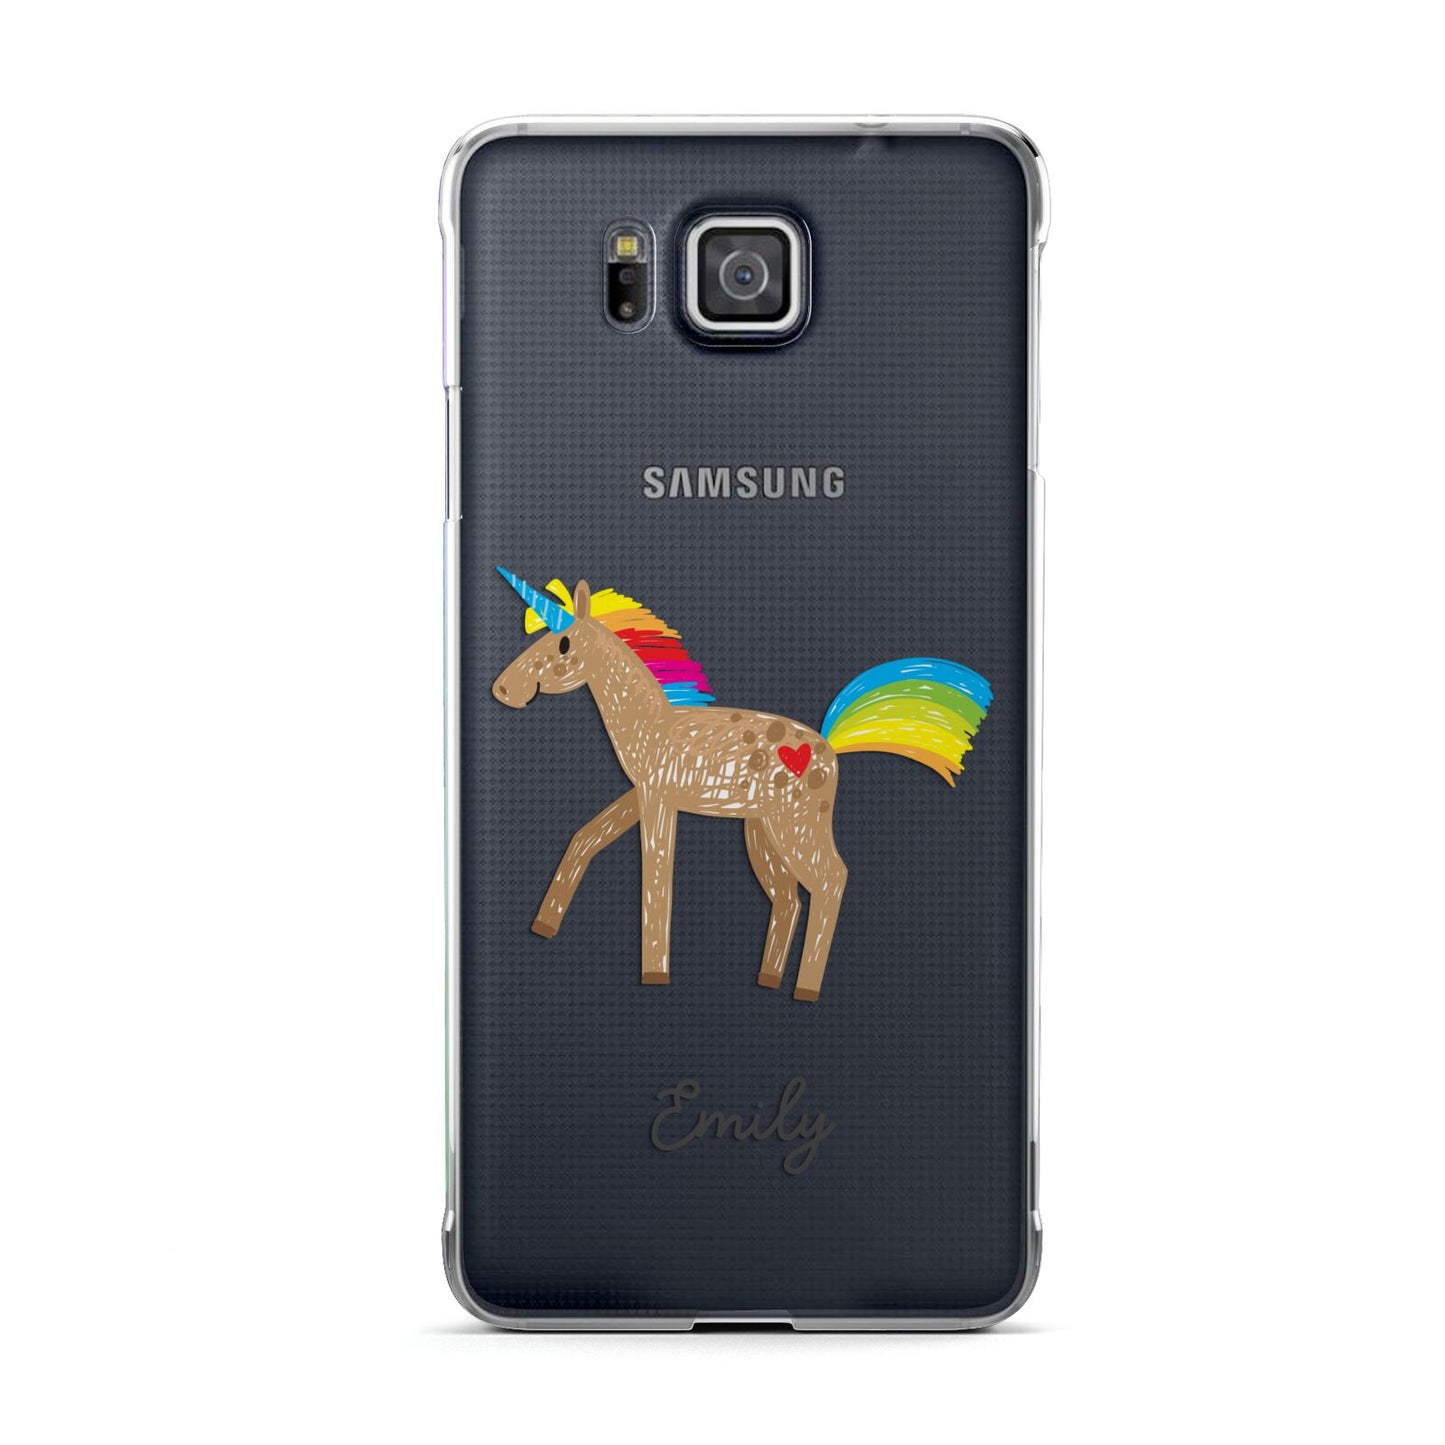 Personalised Unicorn with Name Samsung Galaxy Alpha Case